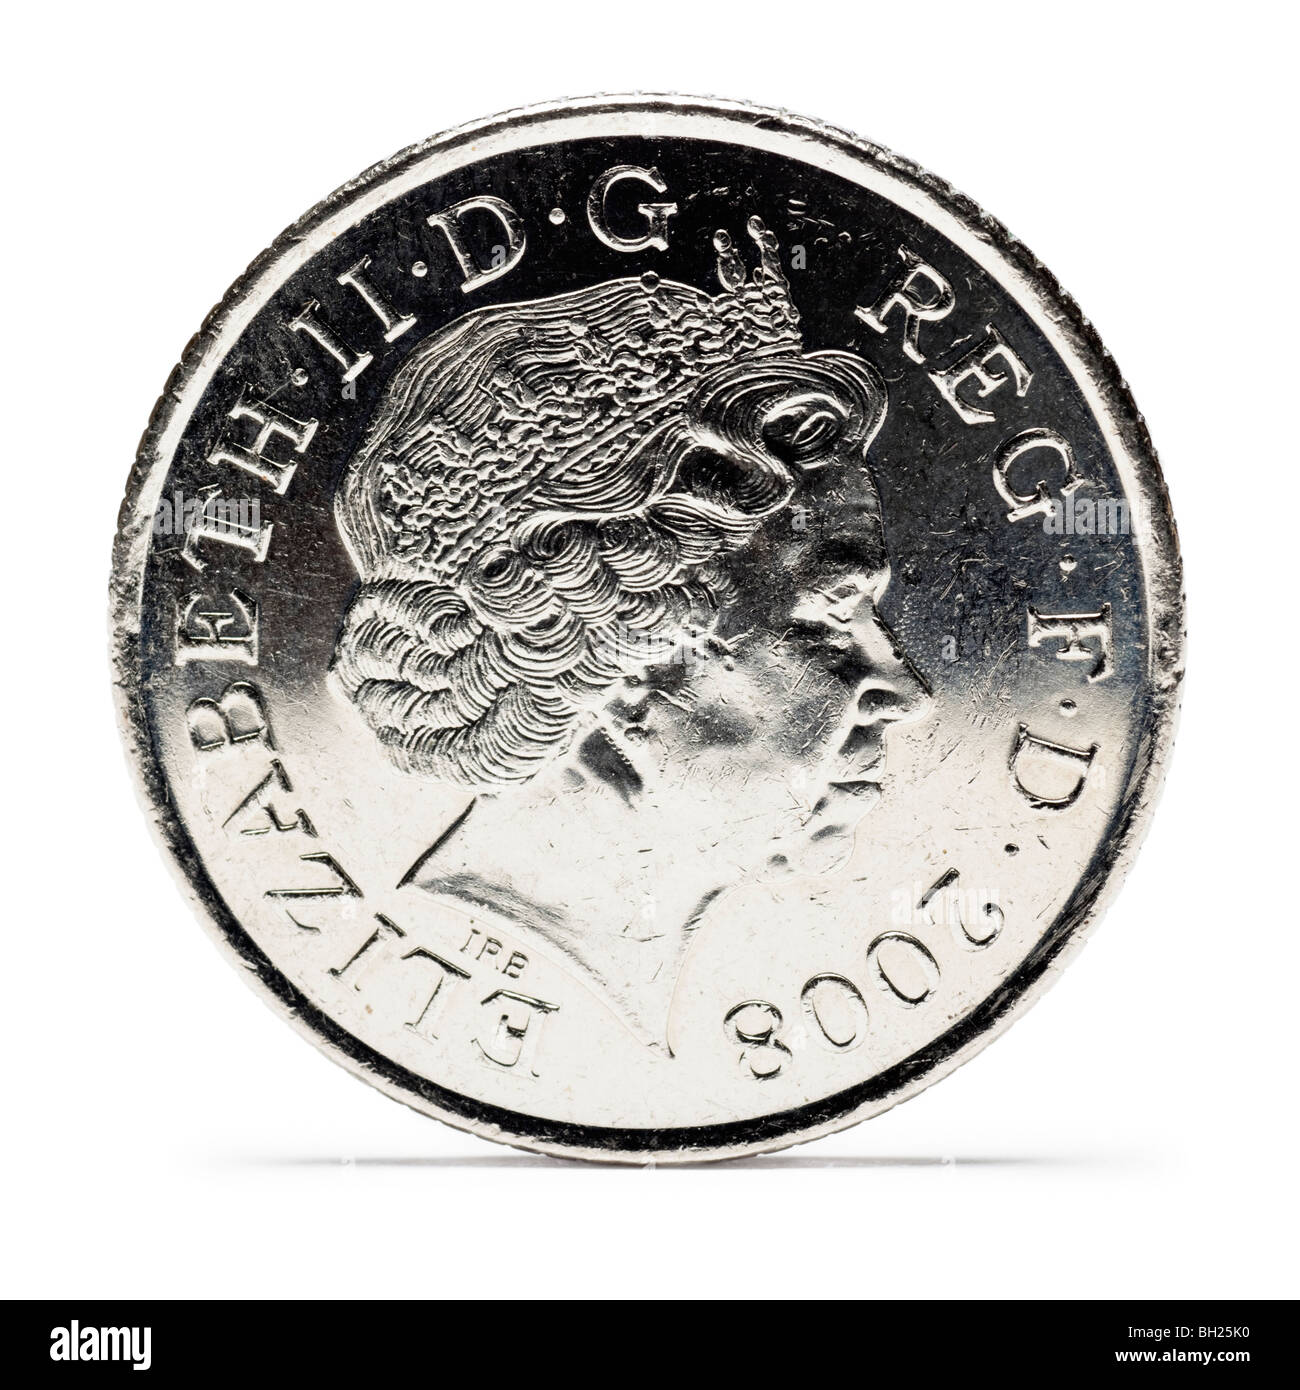 British Ten Pence coin front view Stock Photo - Alamy